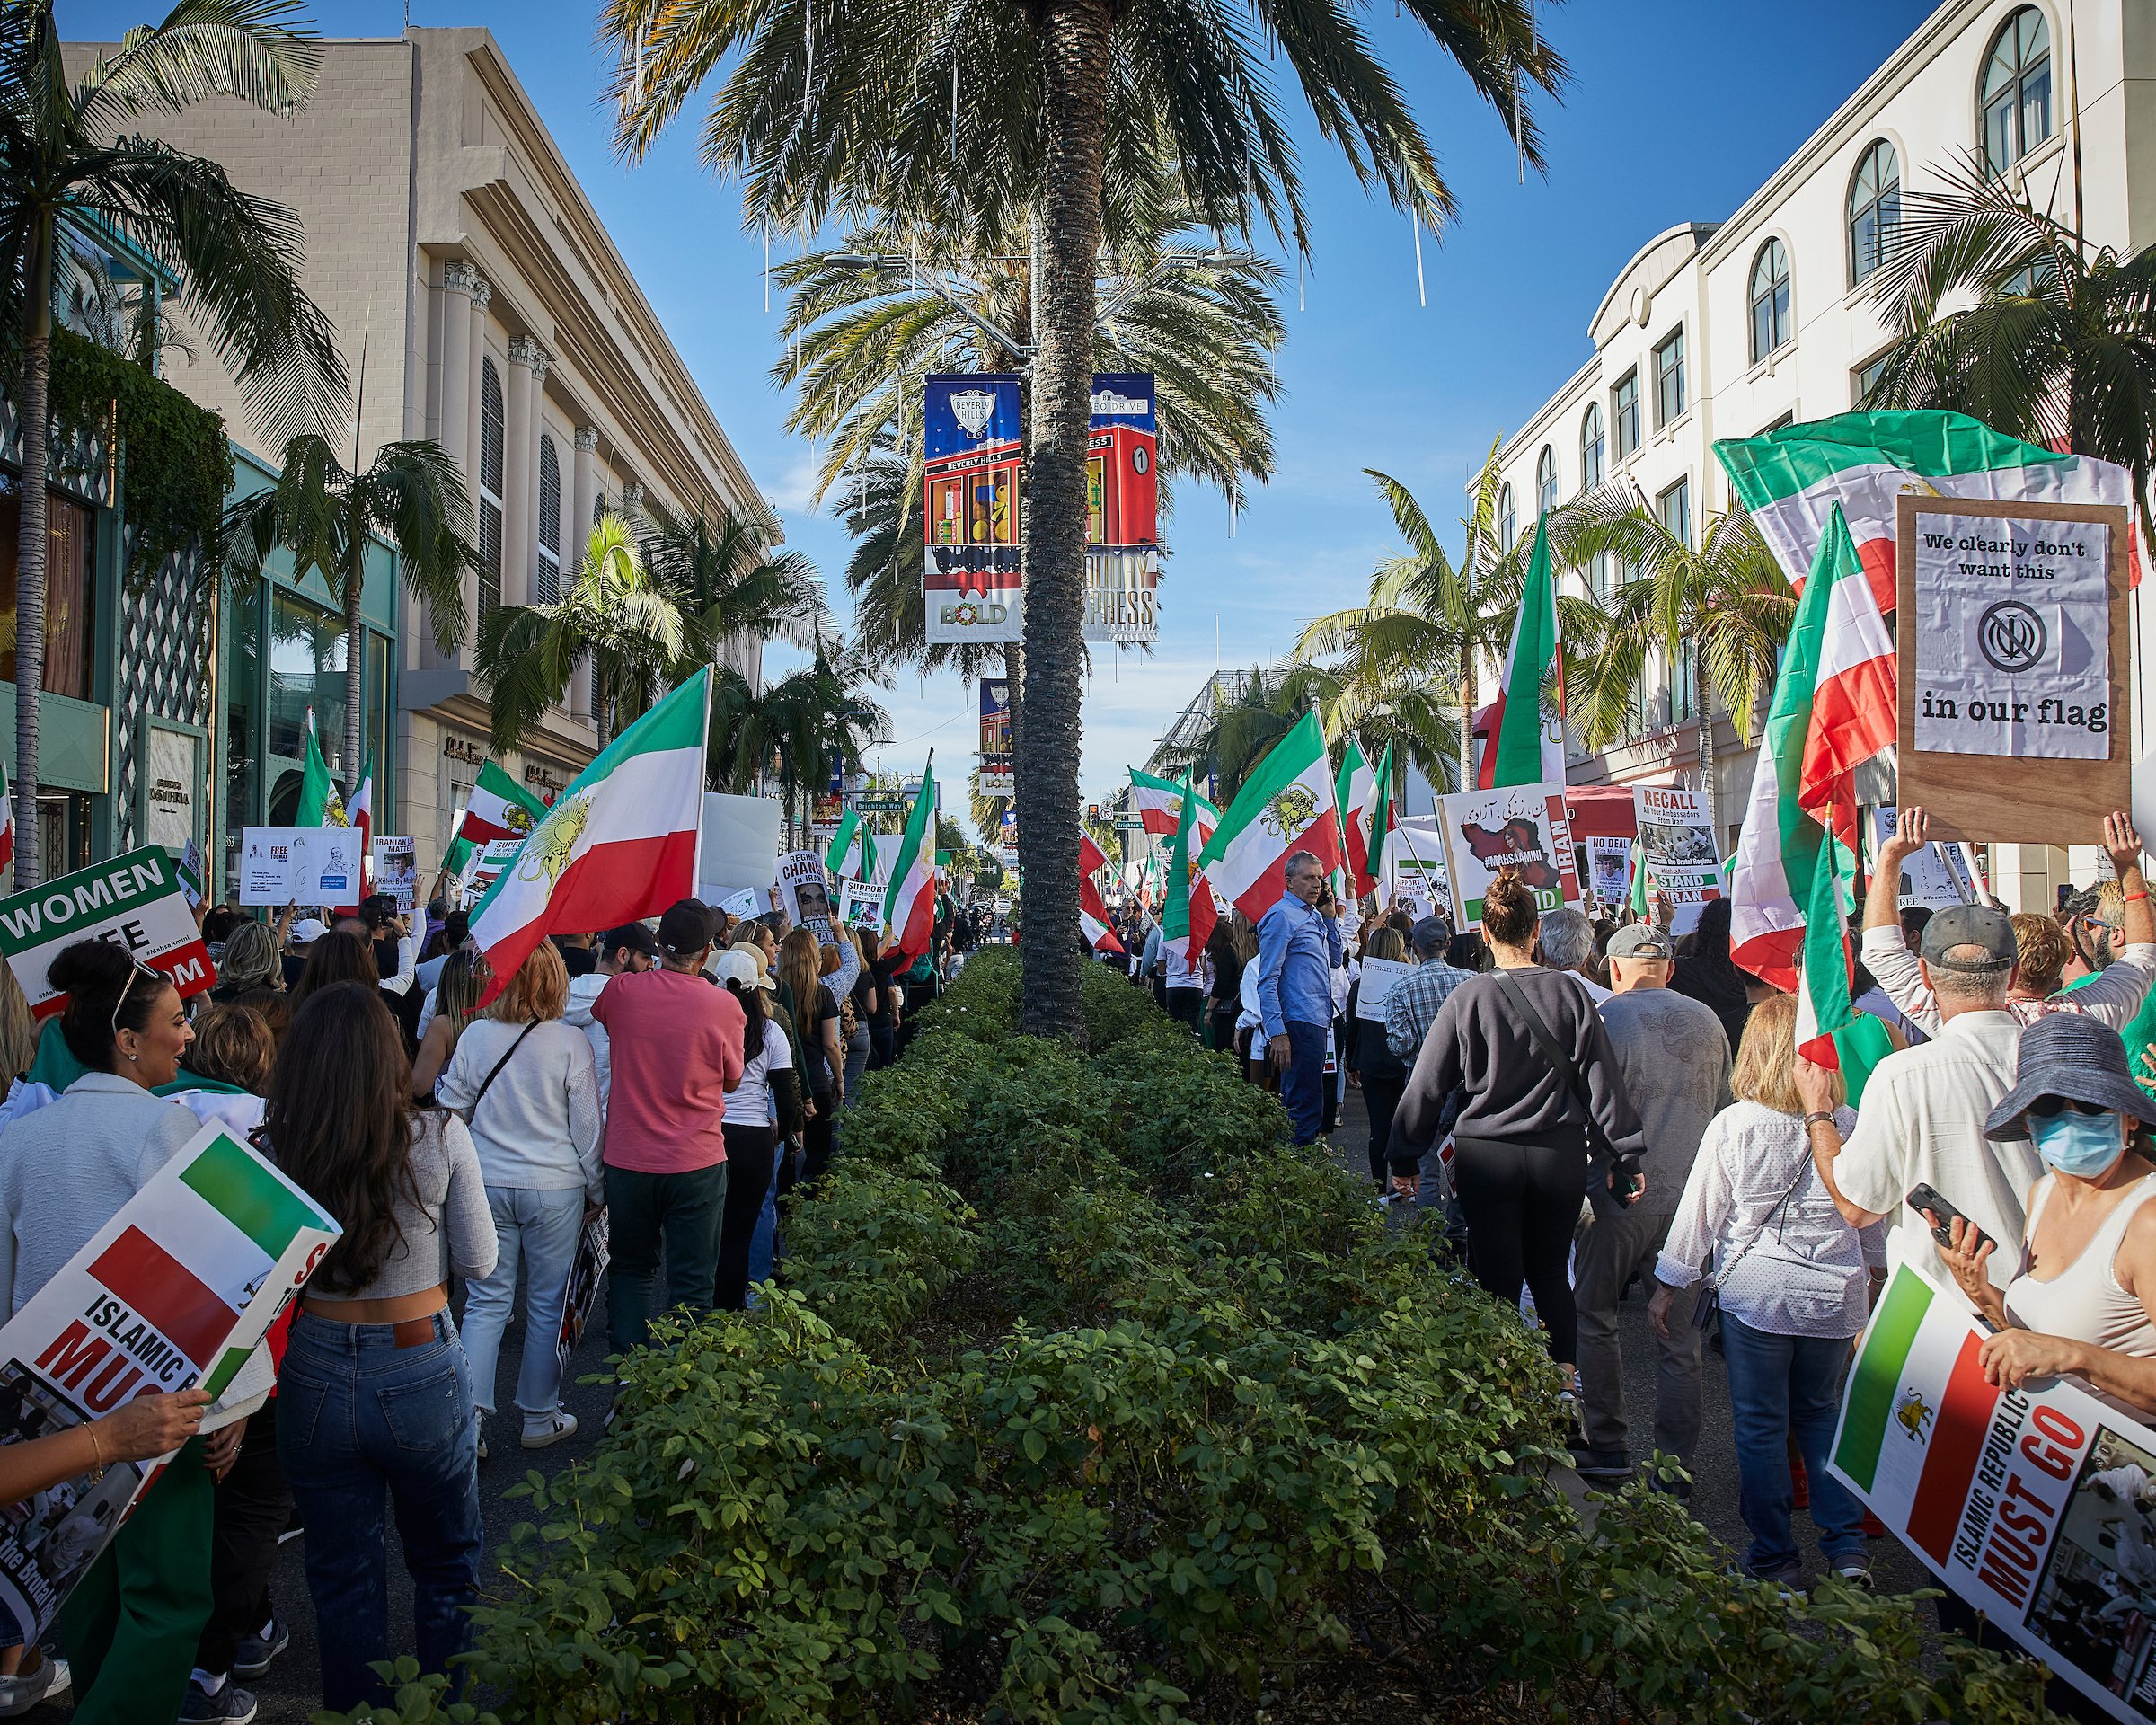   Thousands of organizers and volunteers gathered in Beverly Hills to increase awareness for those who may not know about the Current revolution in Iran.&nbsp;    Photography by Saman Assefi   &nbsp; 